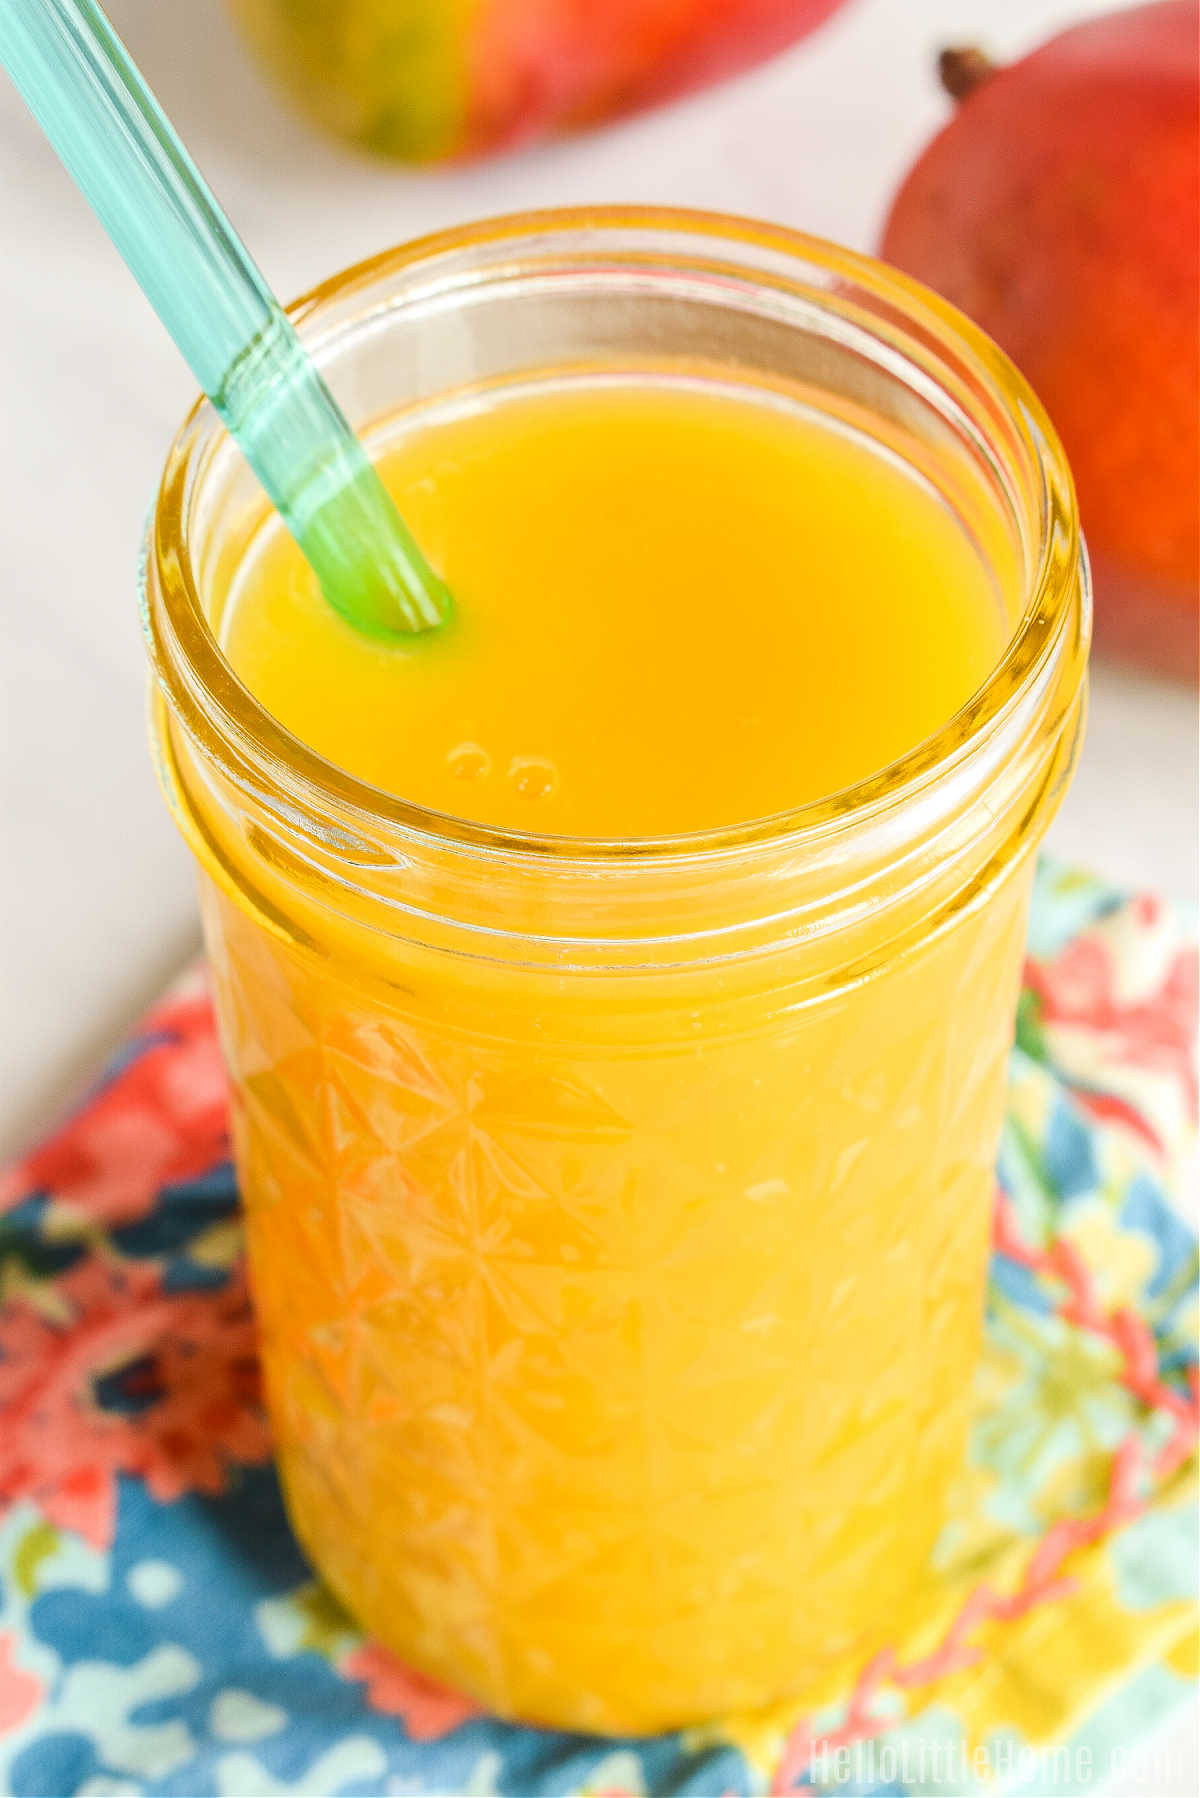 A recipe for mango juice served in a tall glass with a straw.